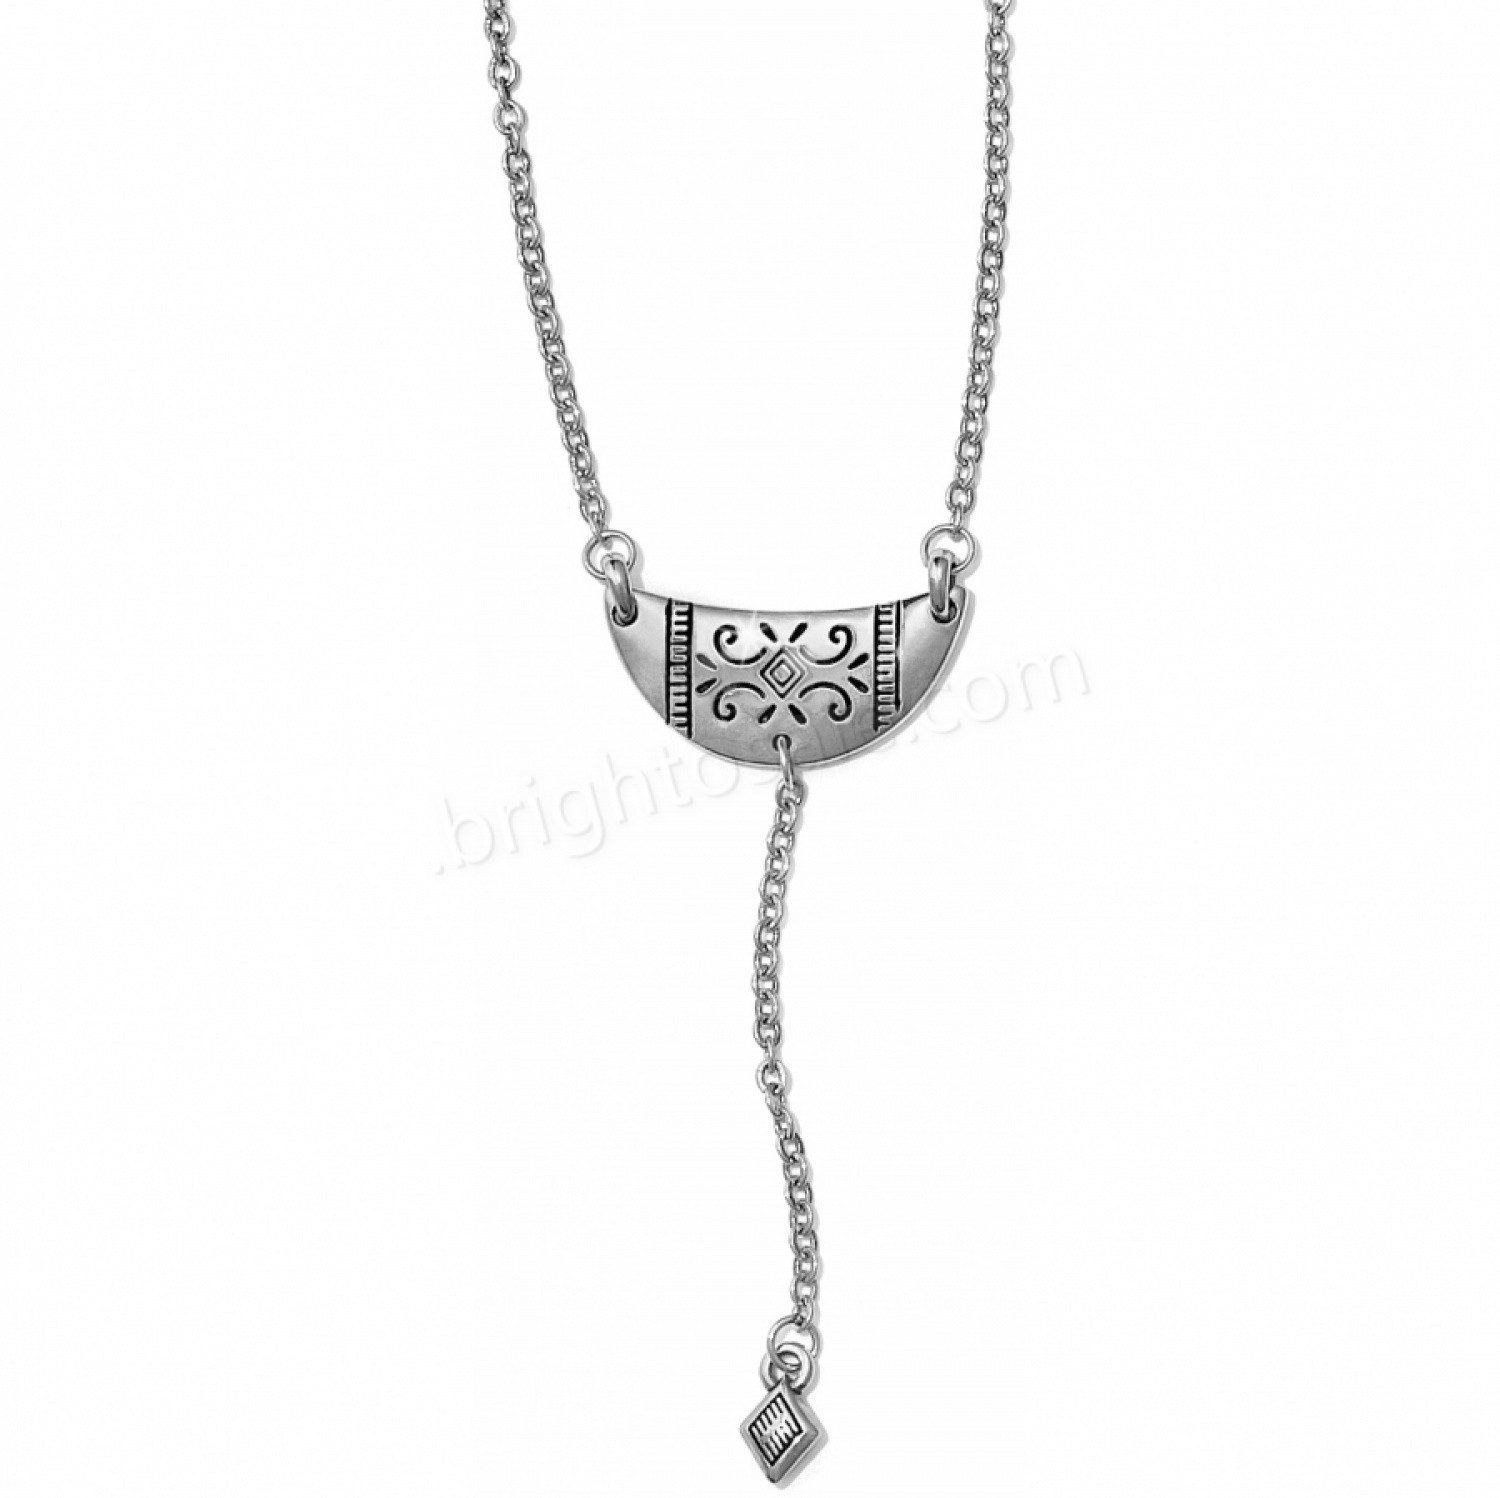 Brighton Collectibles & Online Discount Medaille Medallion Necklace - Brighton Collectibles & Online Discount Medaille Medallion Necklace